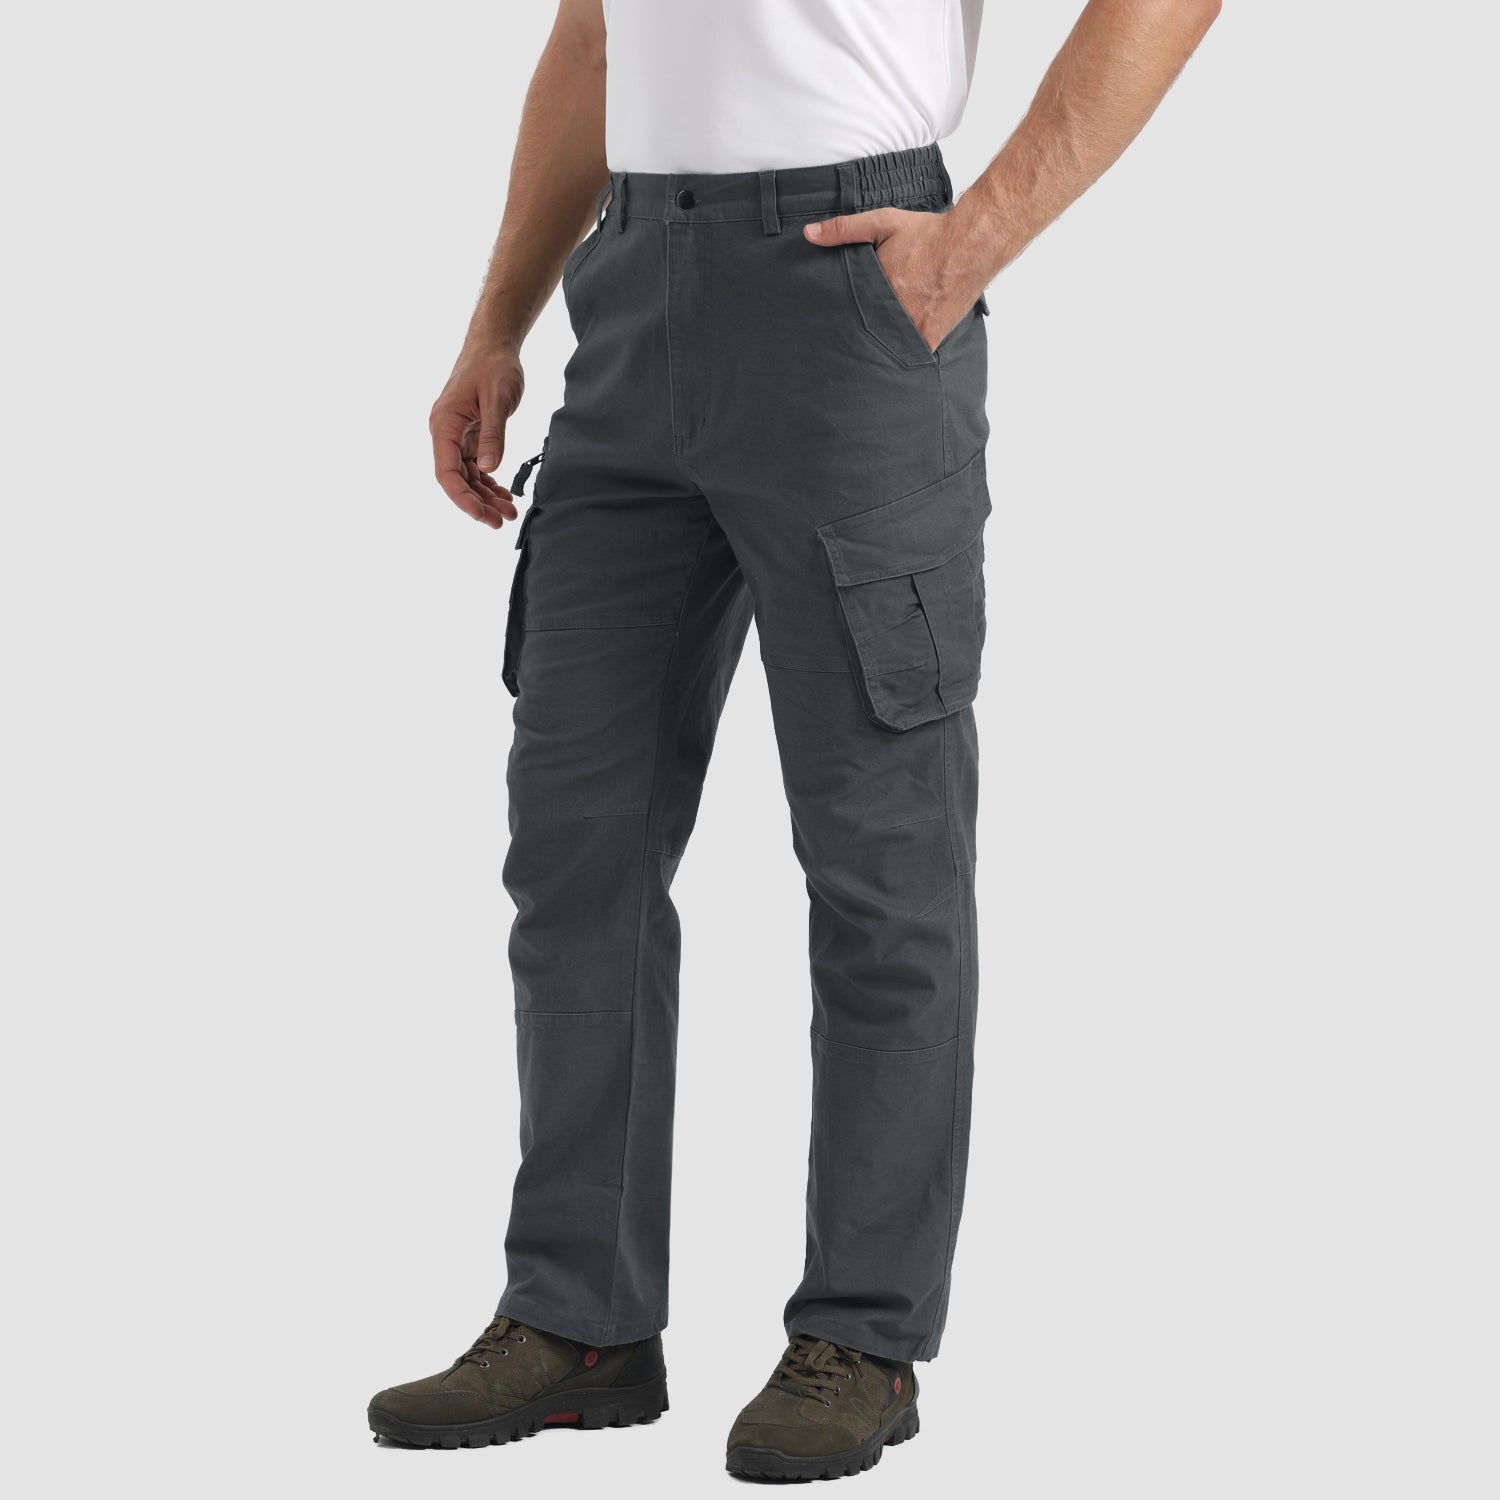 https://magcomsen.com/cdn/shop/products/Men_s-Cargo-Pants-Ripstop-Straight-Leg-Pants-Outdoor-Casual-Fishing-Pant-with-7-Pockets_9.jpg?v=1660791679&width=1500